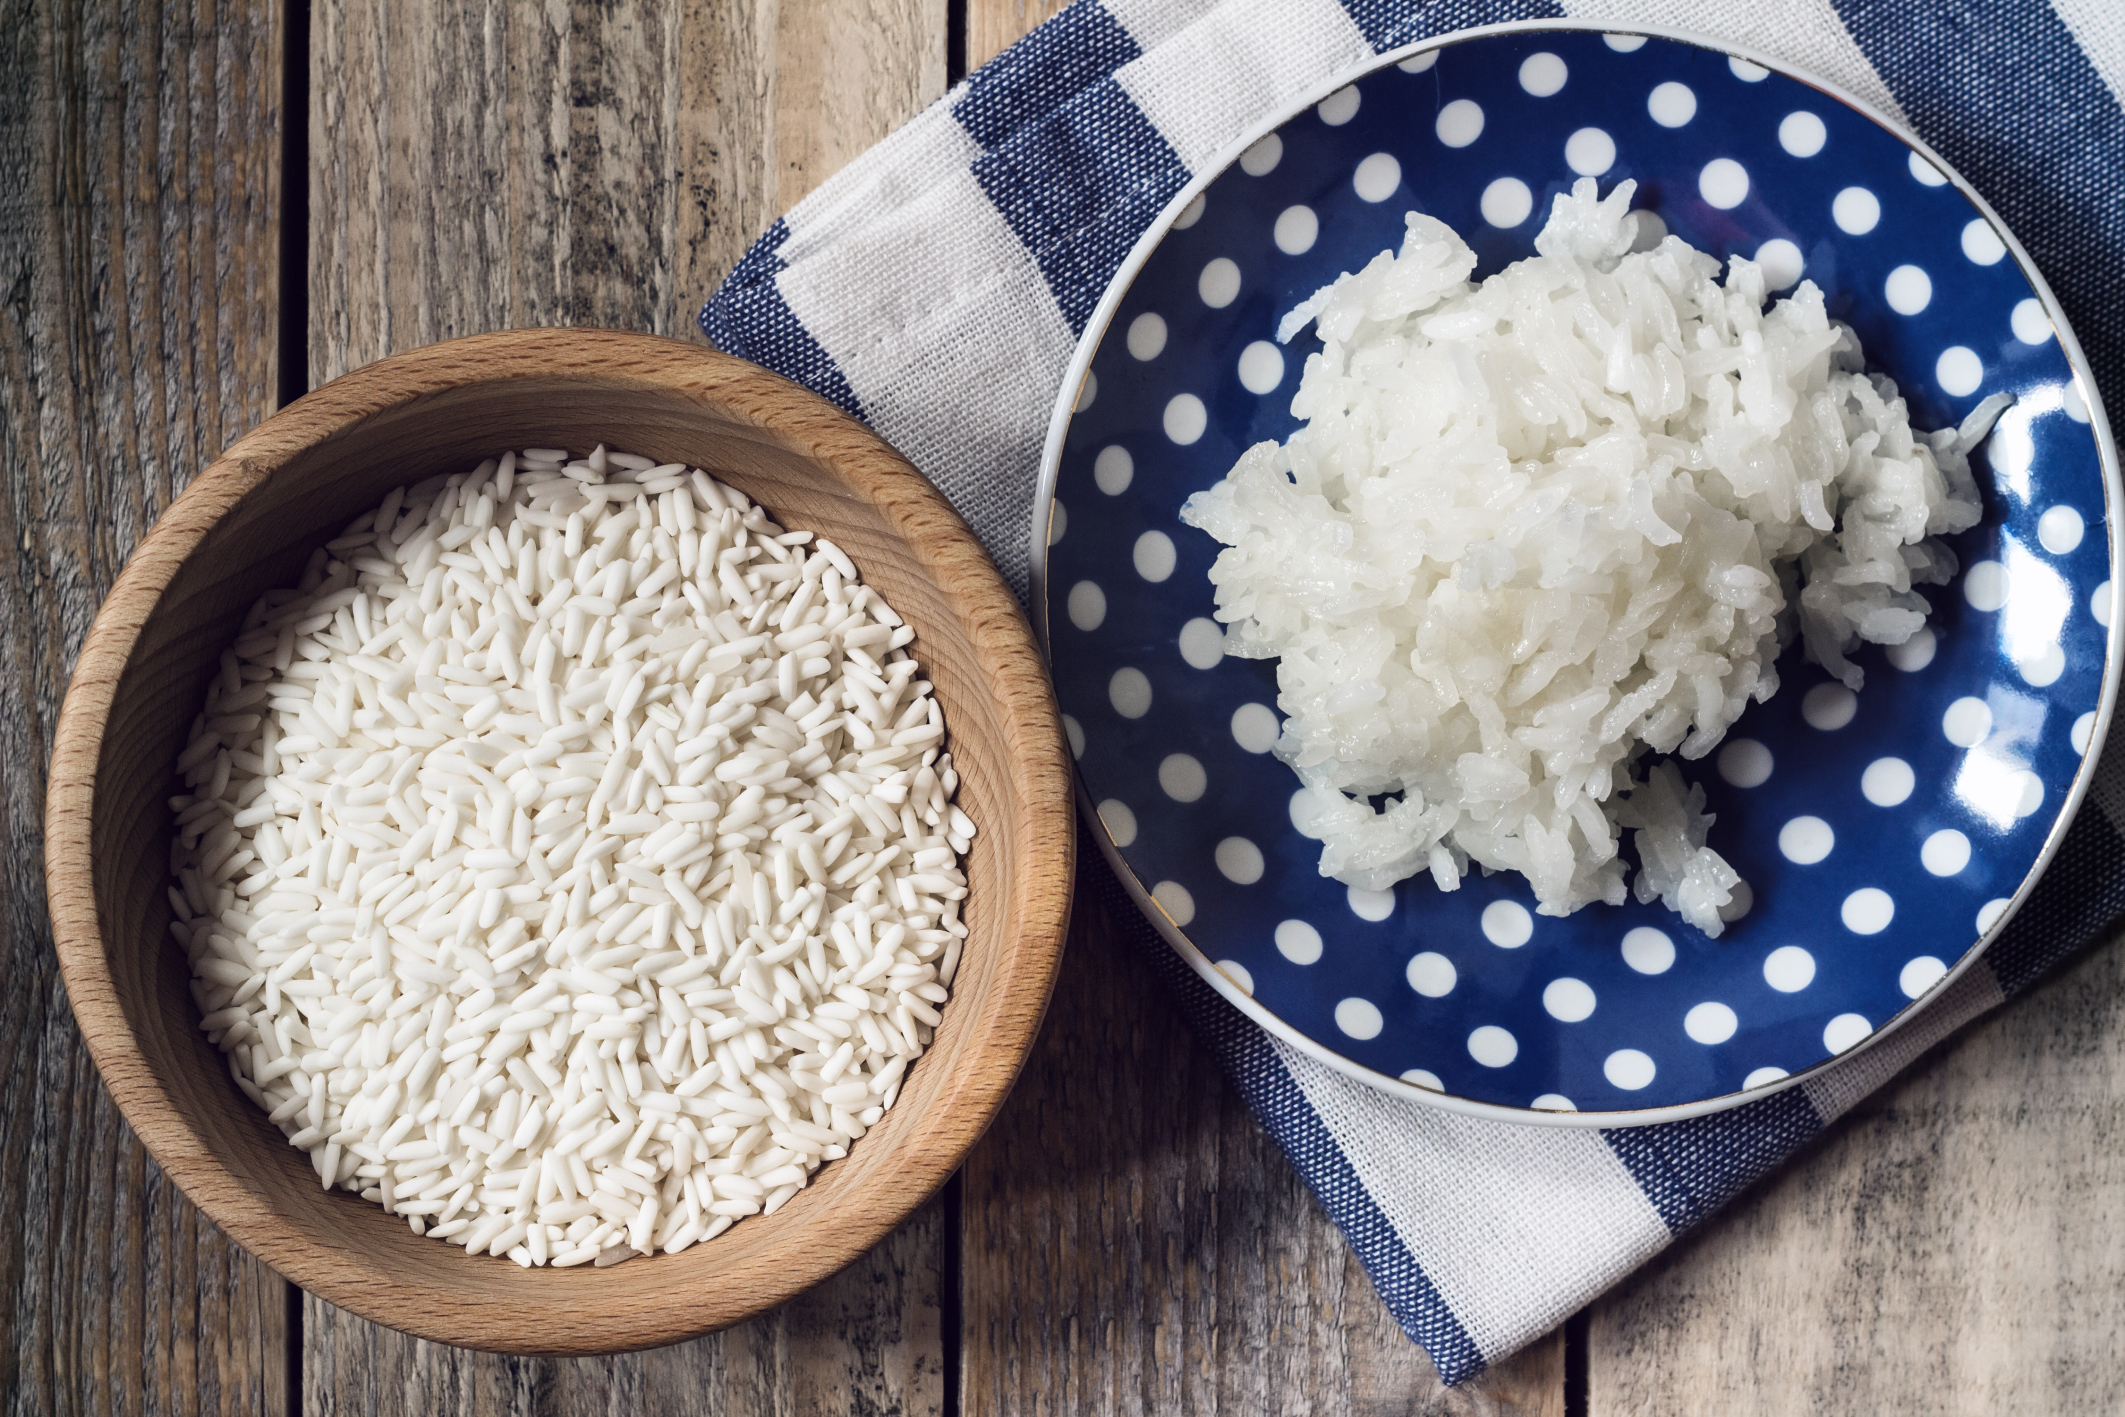 What are the disadvantages of sticky rice?